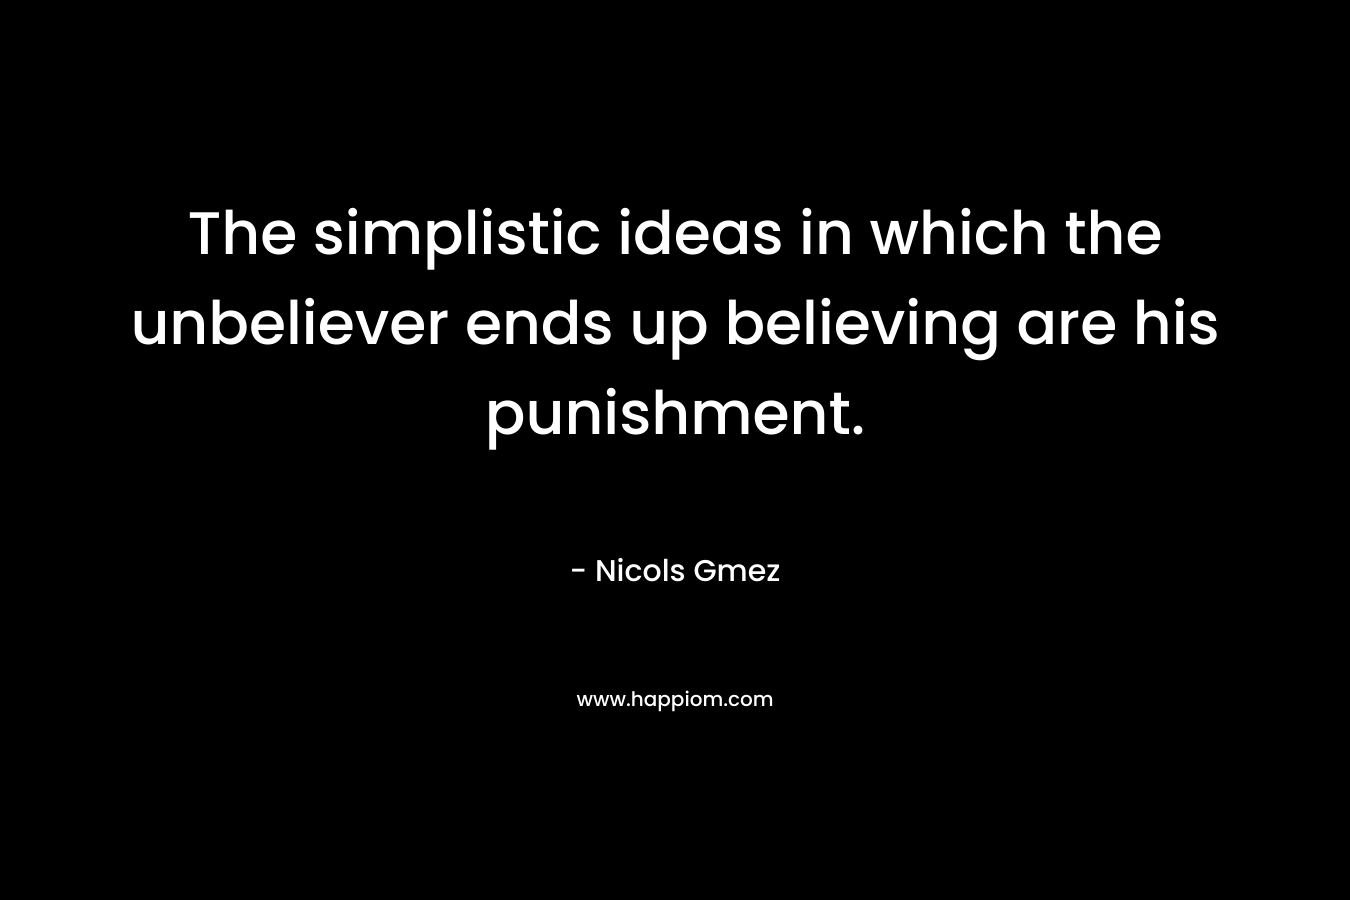 The simplistic ideas in which the unbeliever ends up believing are his punishment. – Nicols Gmez